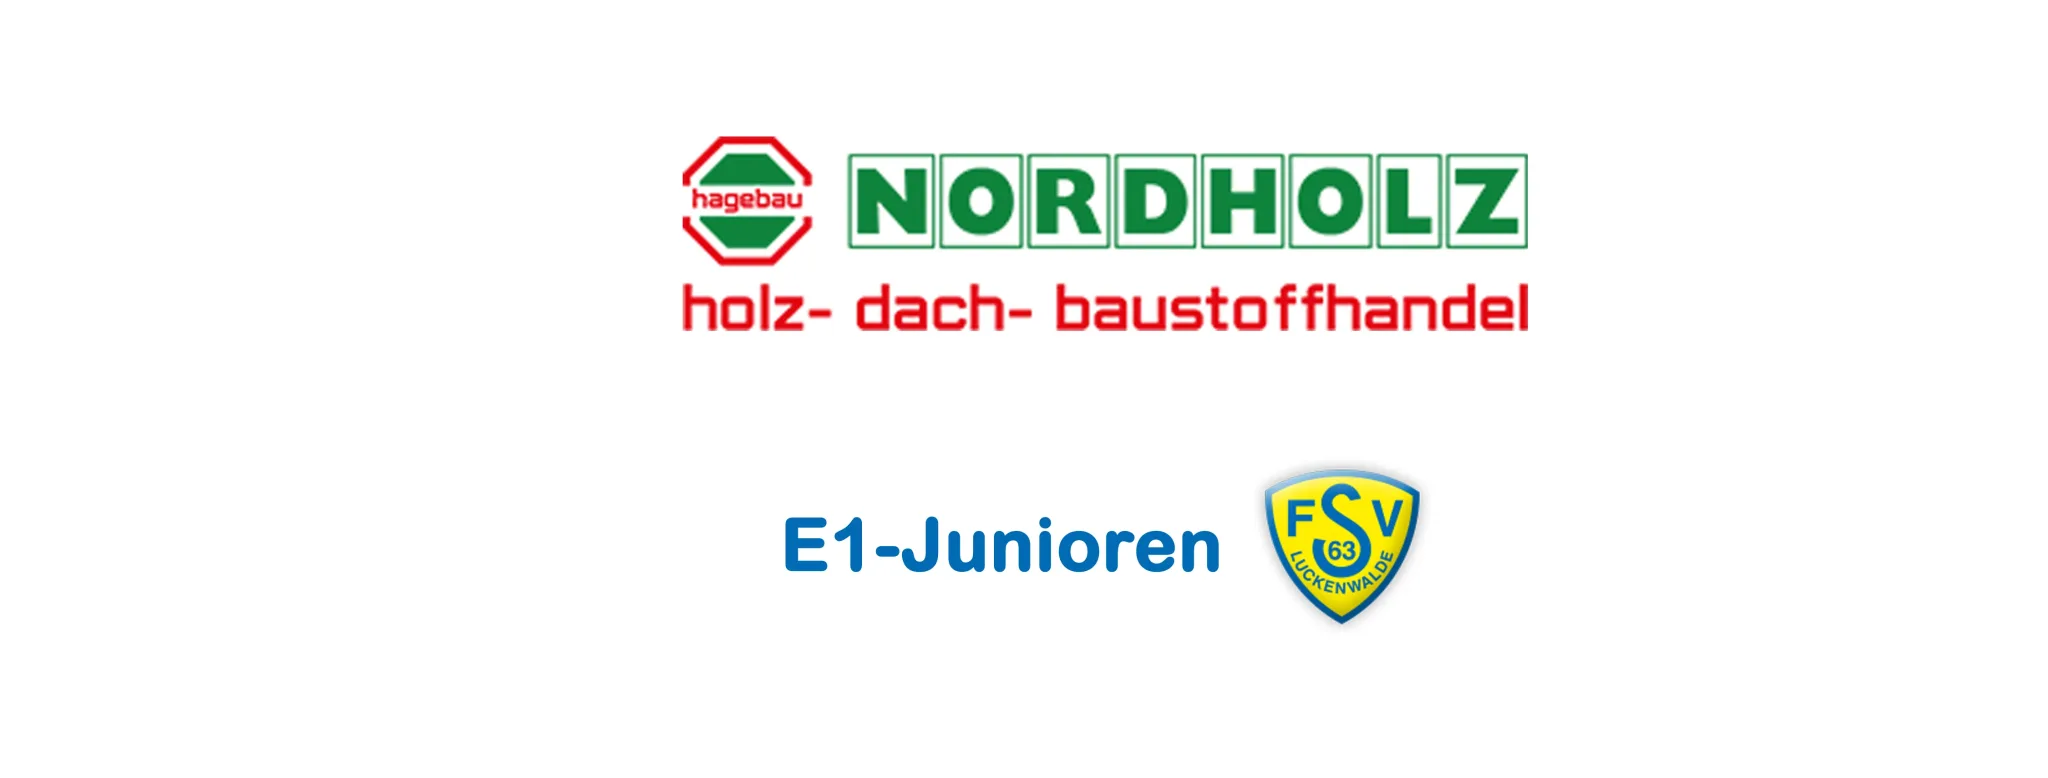 nordholz cup